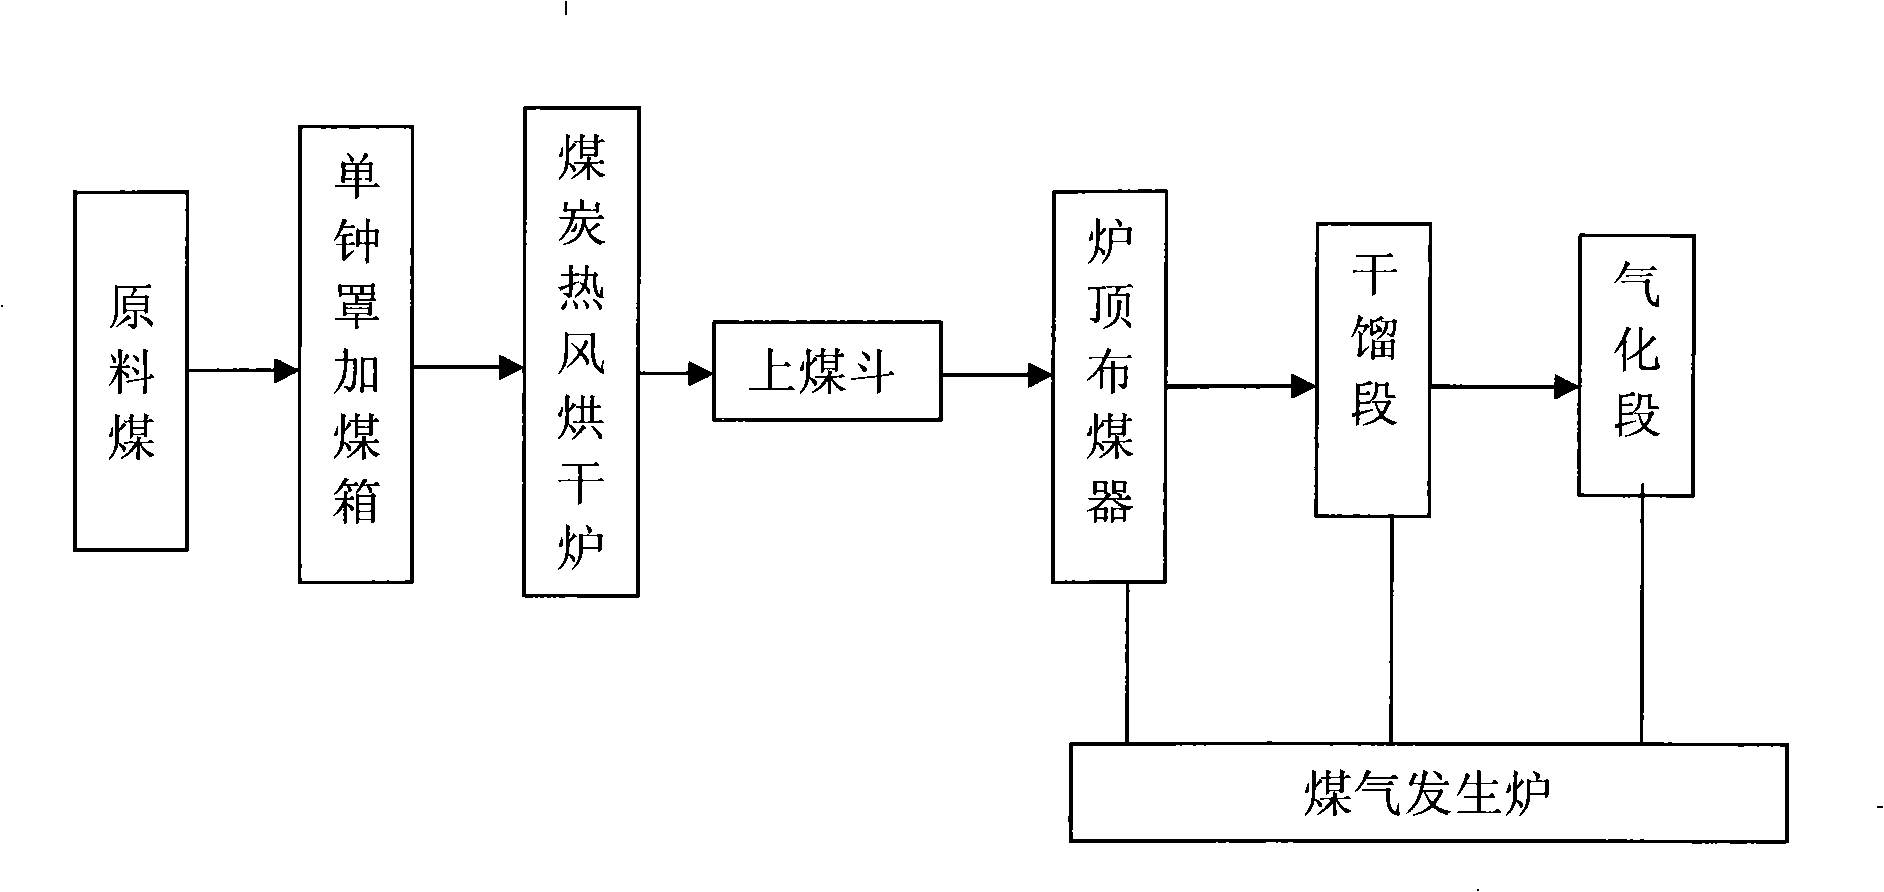 Normal pressure non-phenol method for fixed-bed gas producer